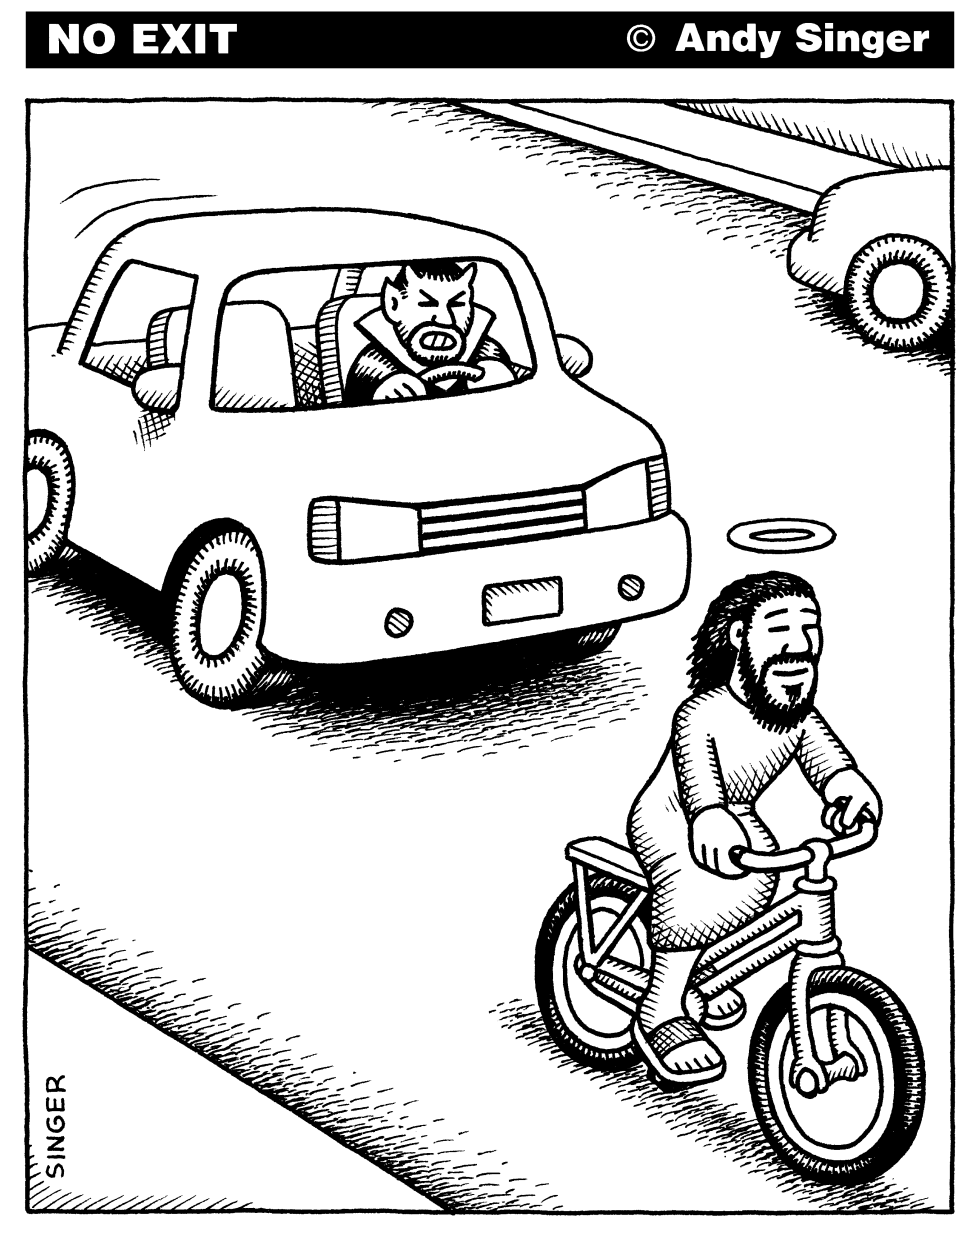 DEVIL CAR AND JESUS BIKE by Andy Singer